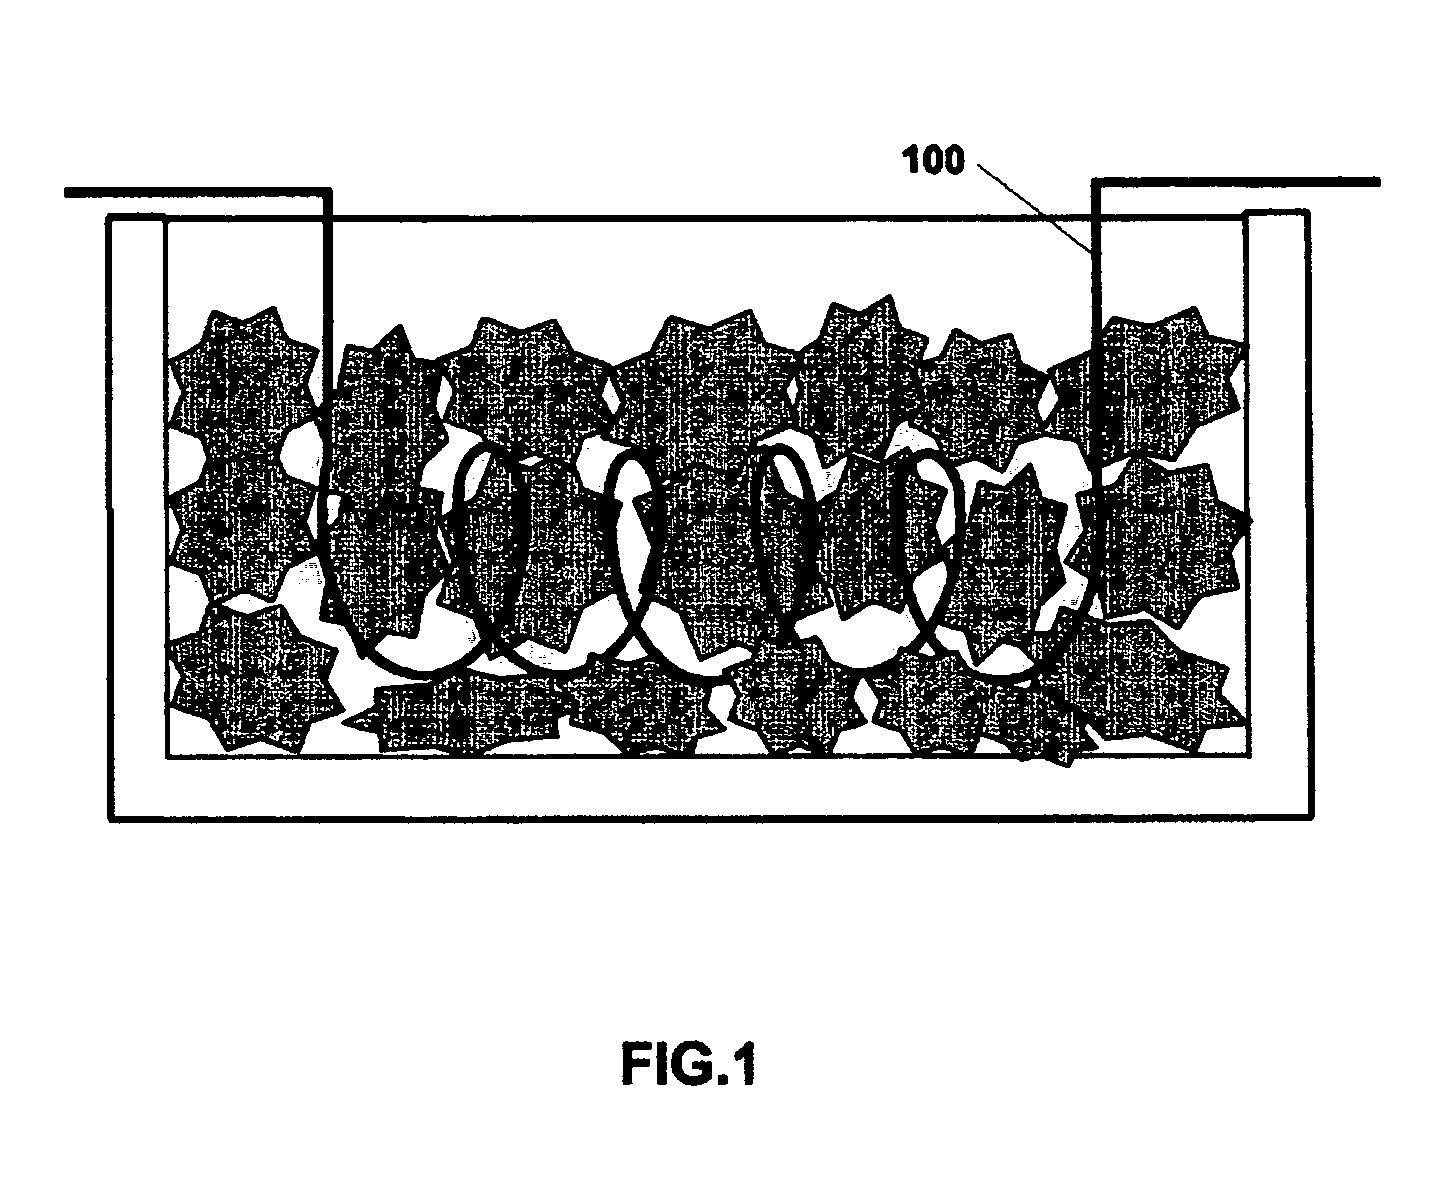 Method and device for cooling beverages